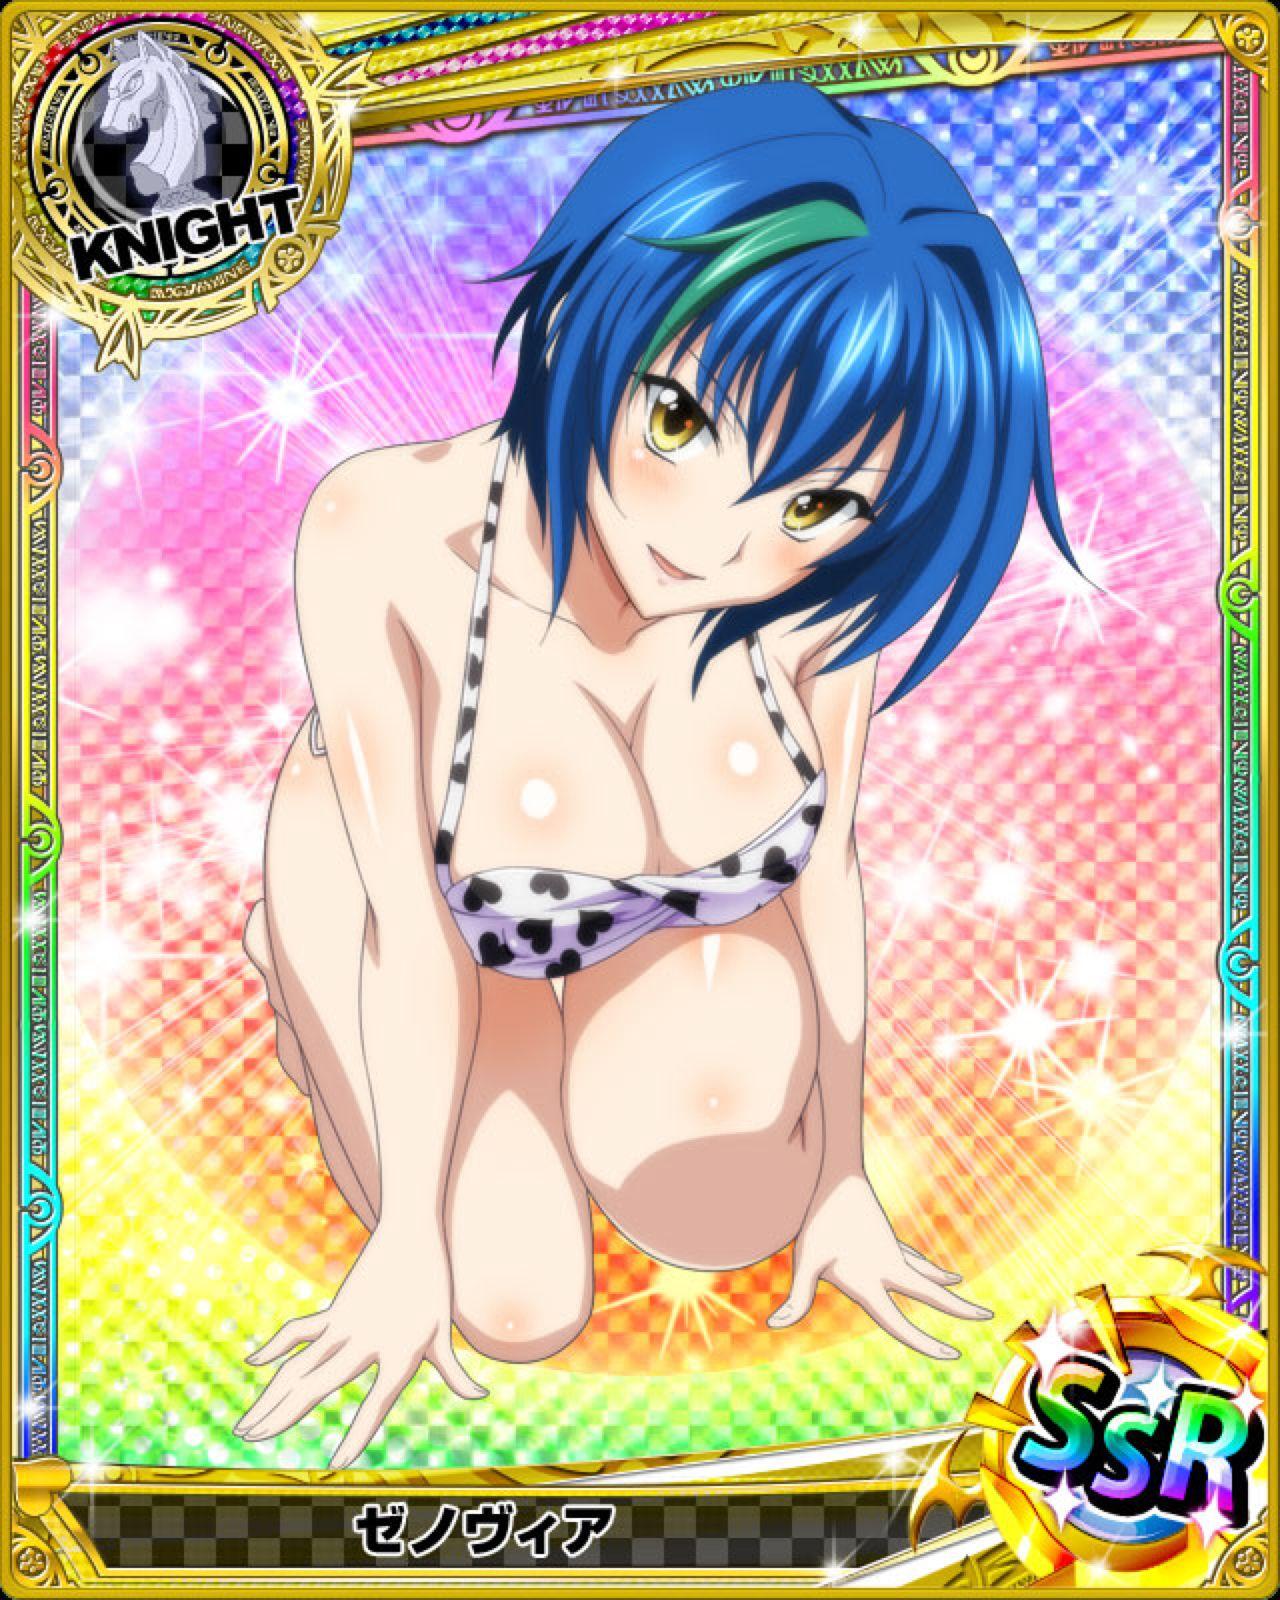 55+ Hot Pictures Of Xenovia Quarta from High School DxD That Will Make Your Day A Win | Best Of Comic Books